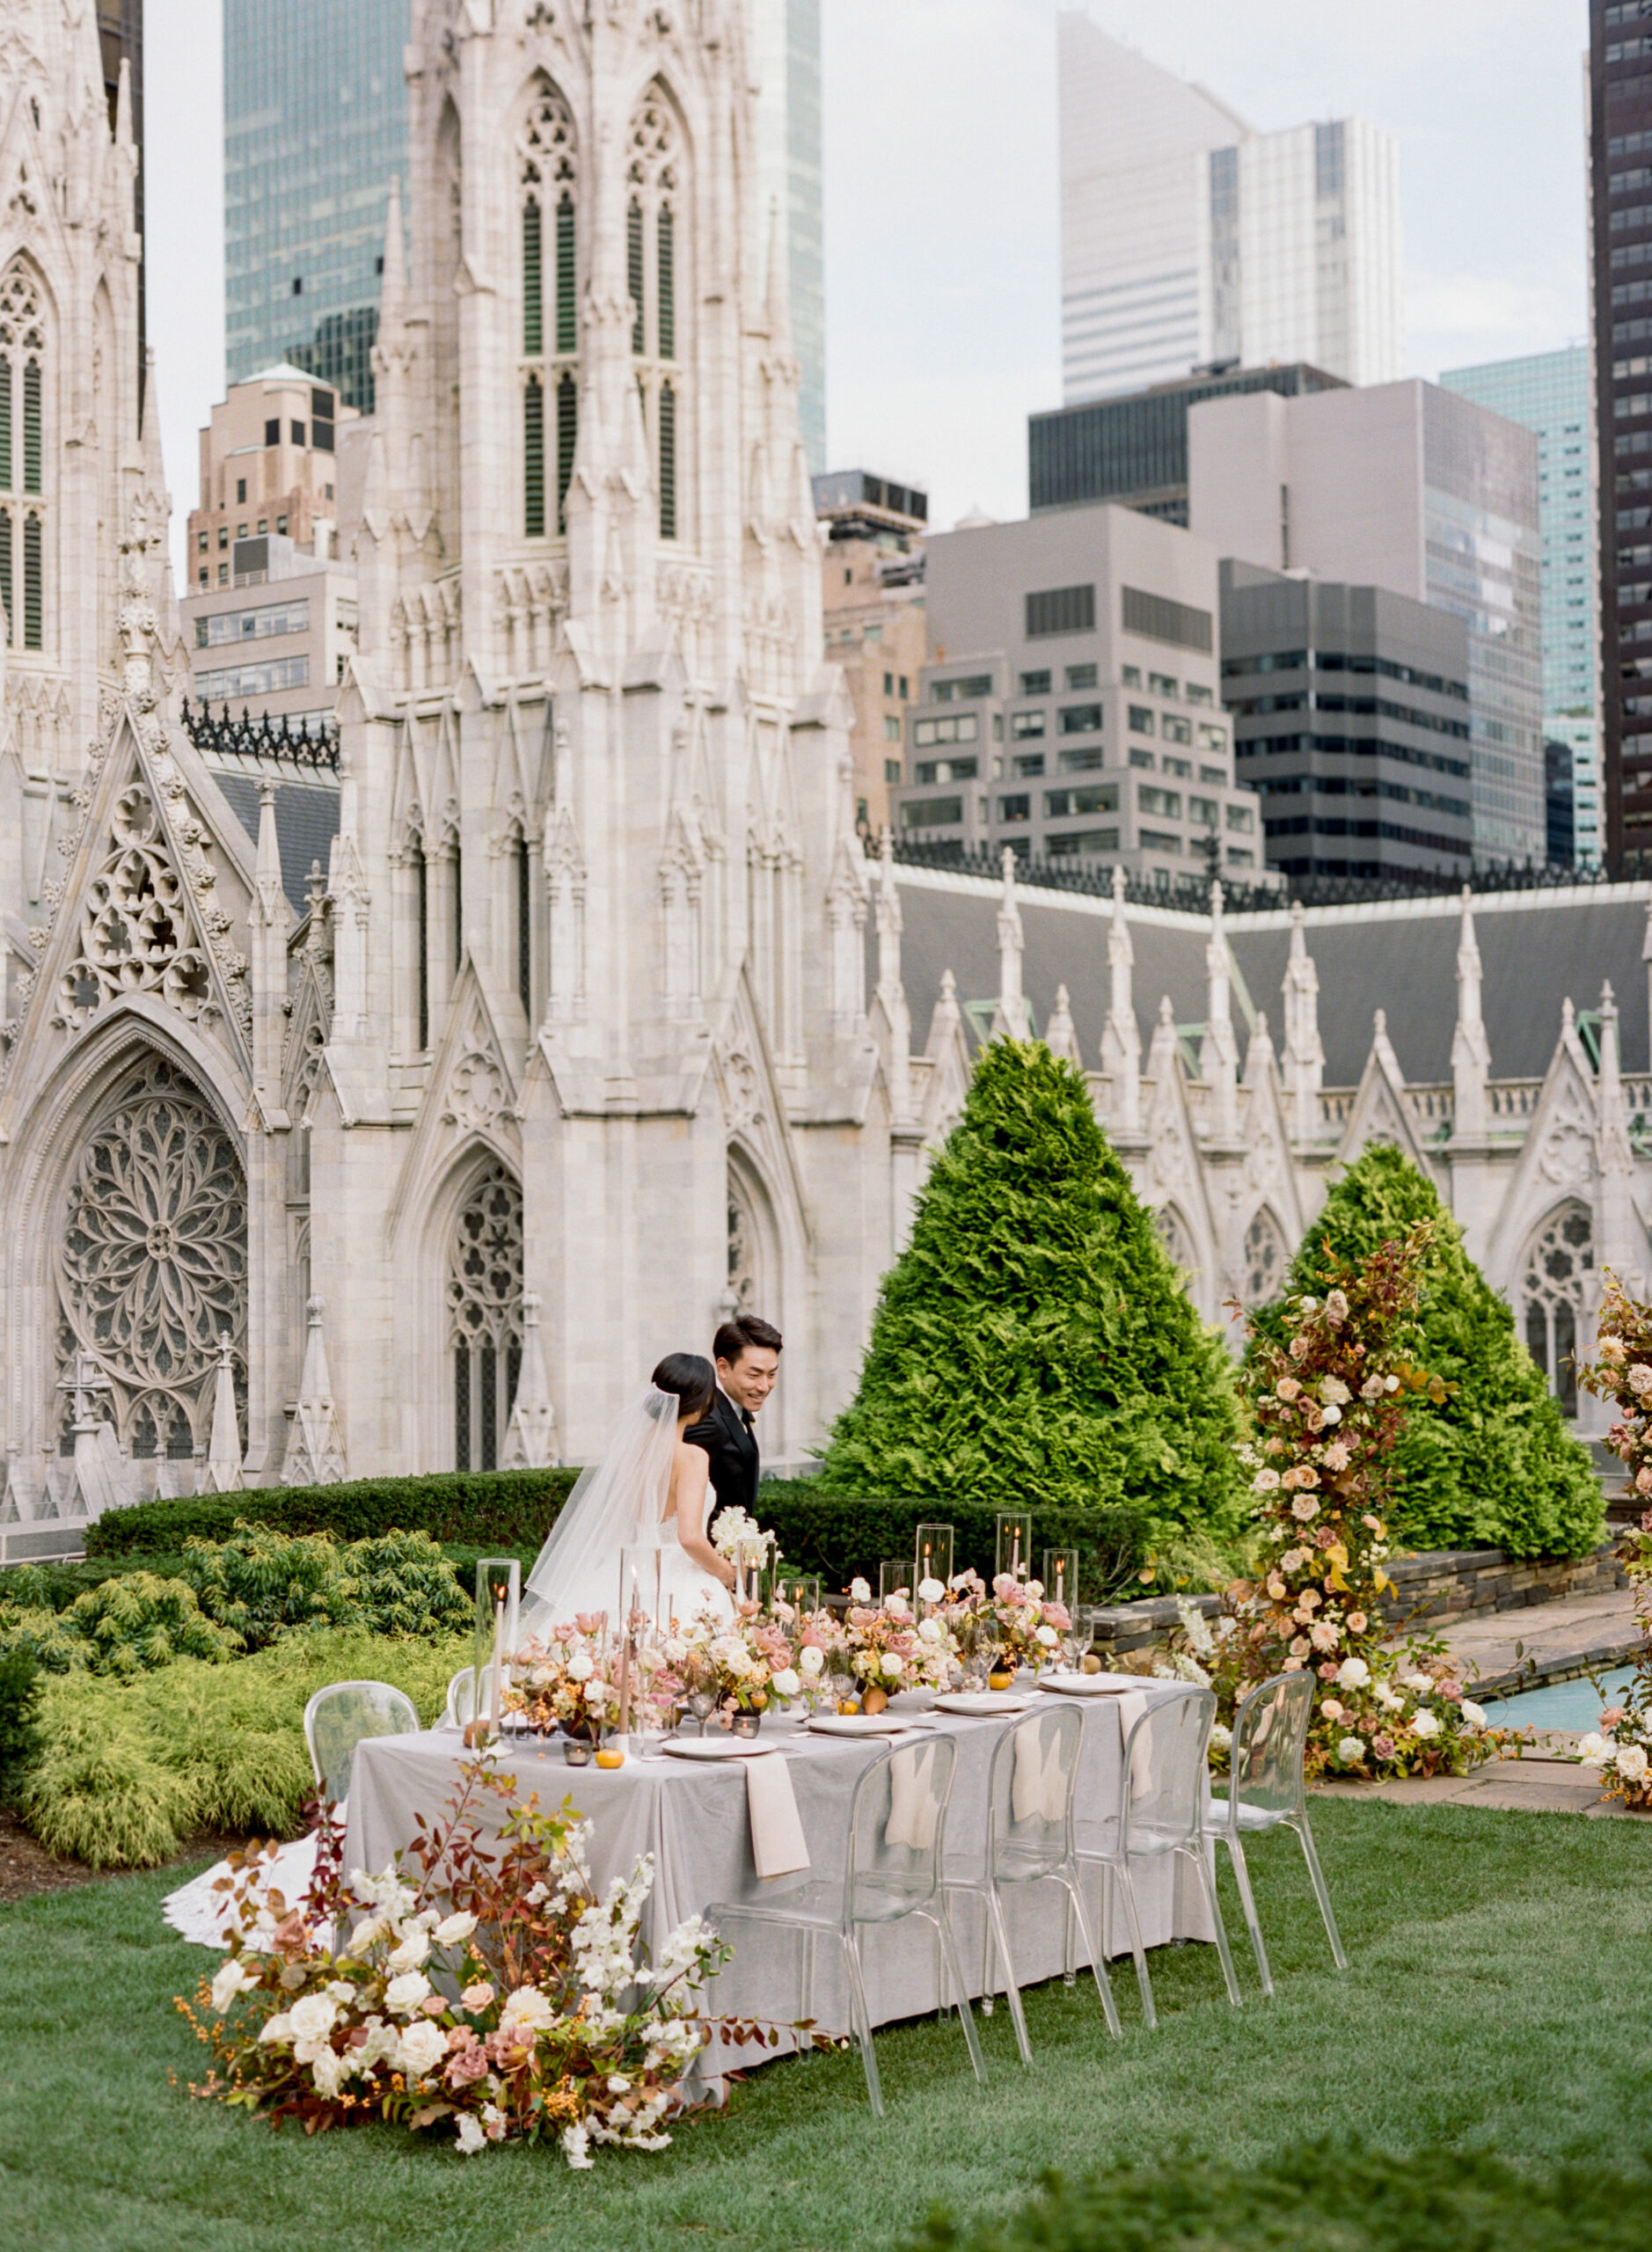 Bride and groom walking around their wedding table outdoors at NYC rooftop wedding venue 620 Loft & Garden